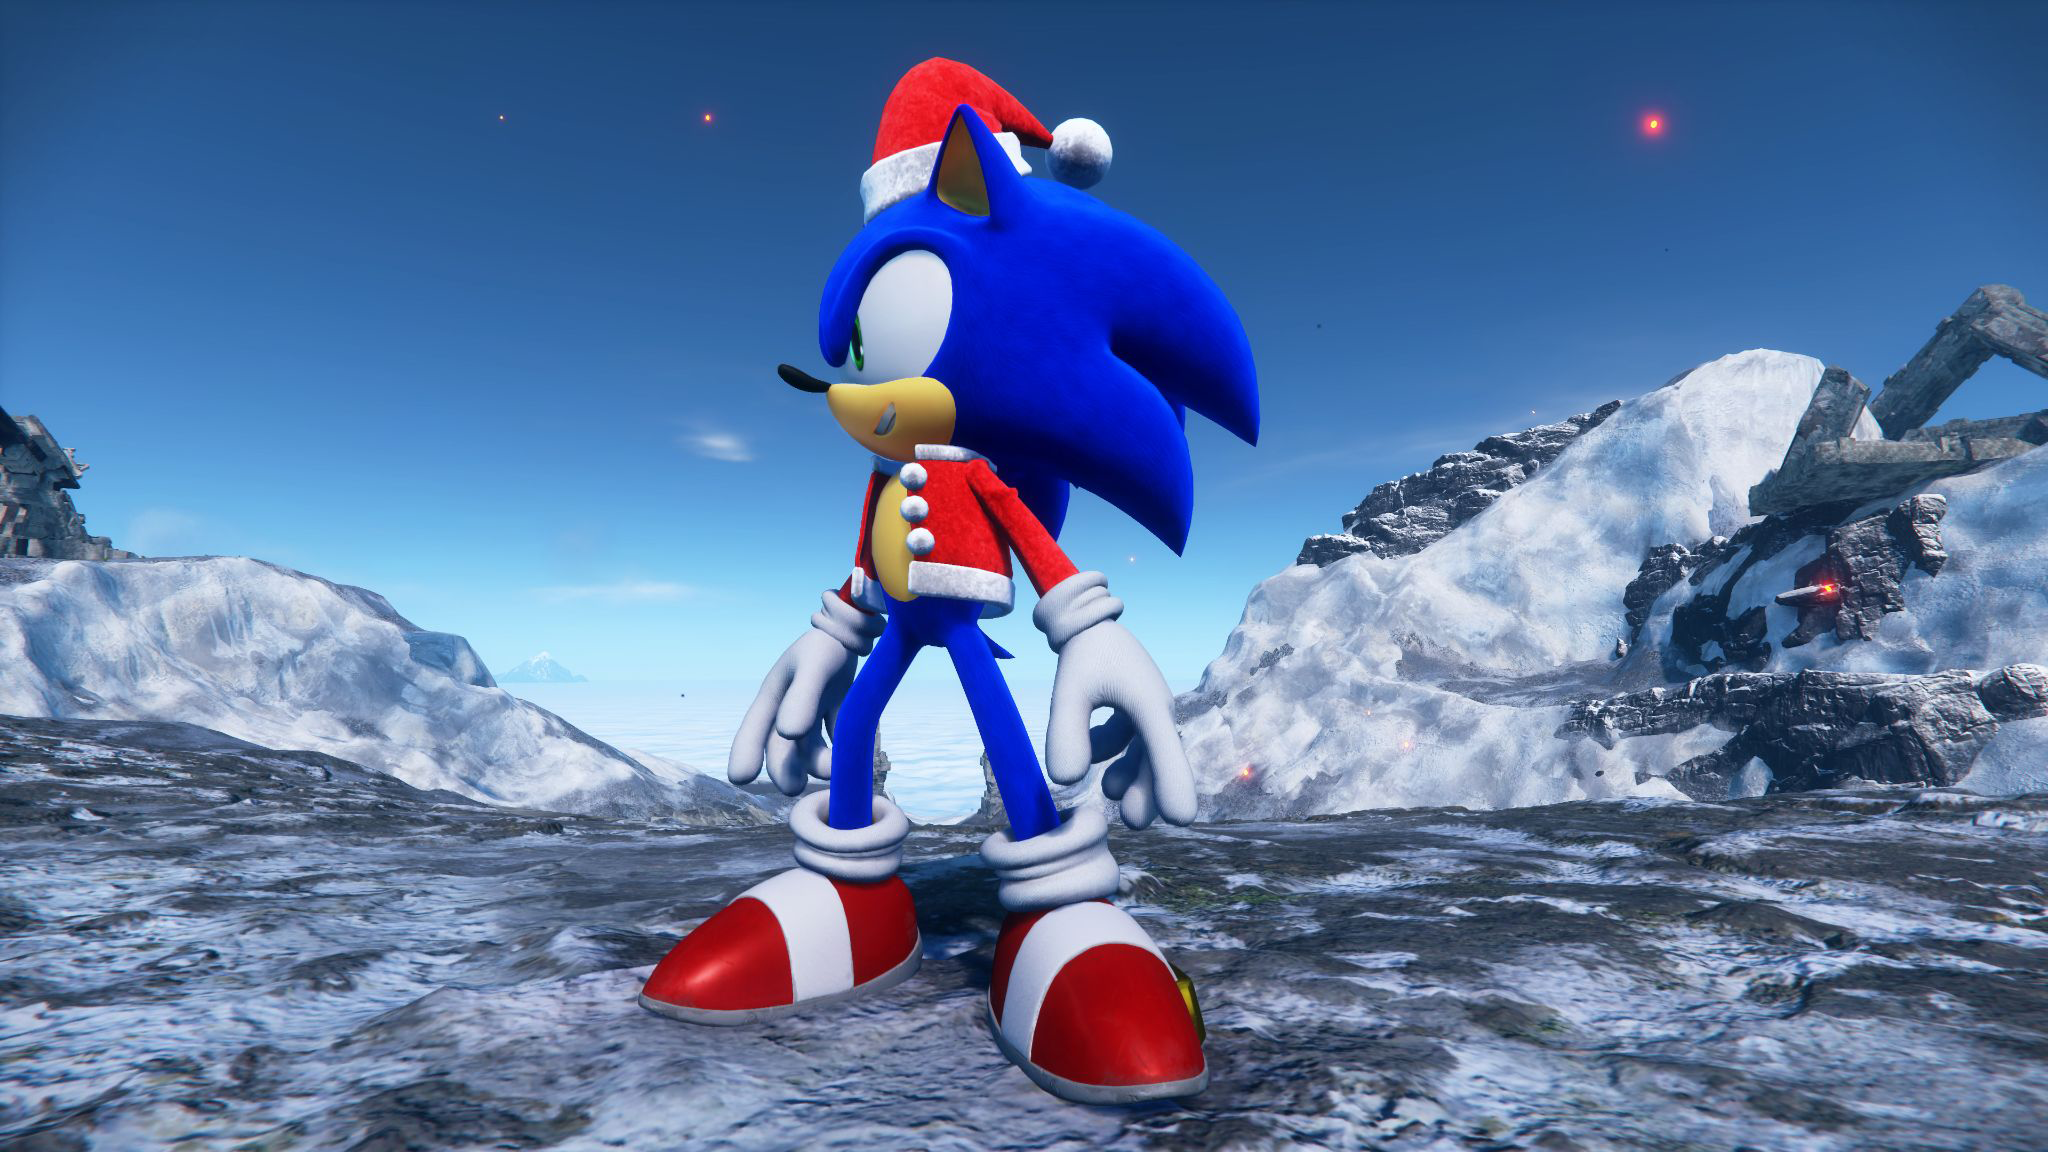 Sonic Frontiers 2 may play more like Sonic Adventure suggests